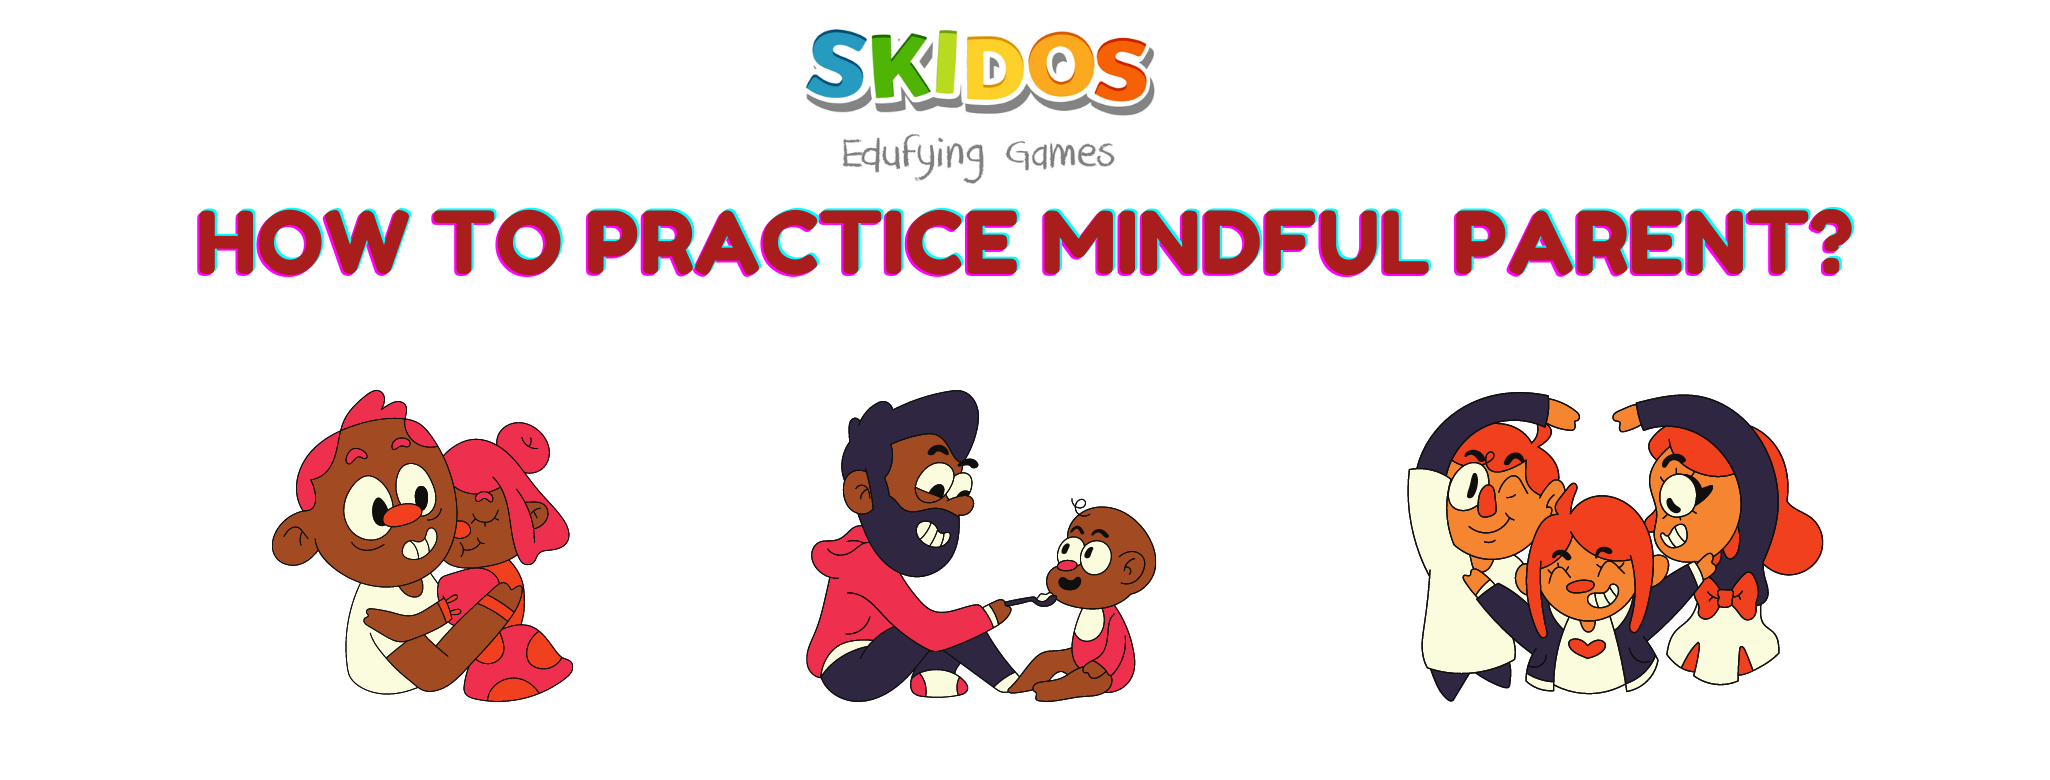 How to practice mindful parent?